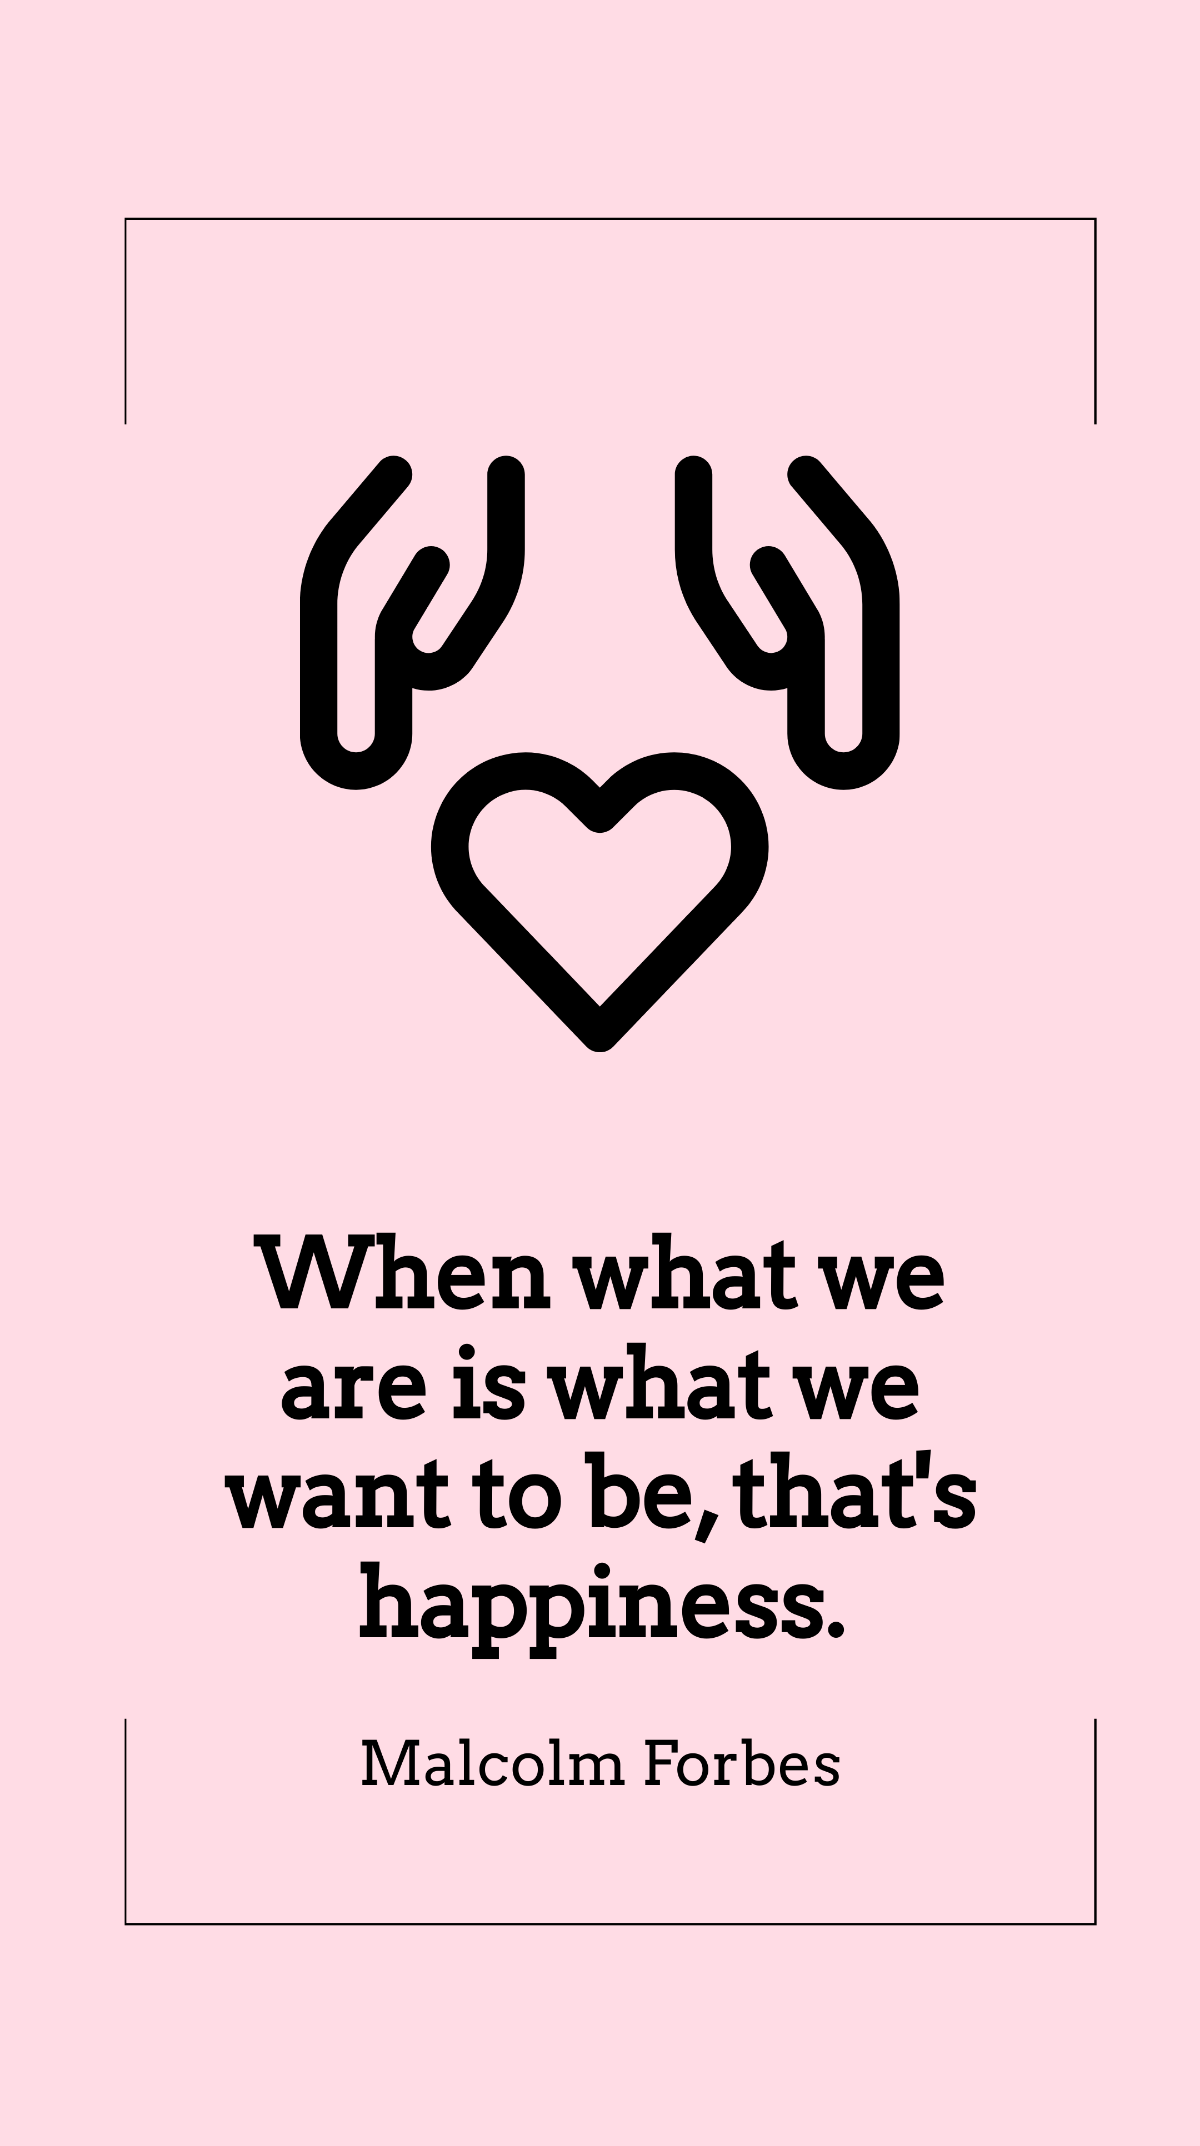 Malcolm Forbes - When what we are is what we want to be, that's happiness. Template